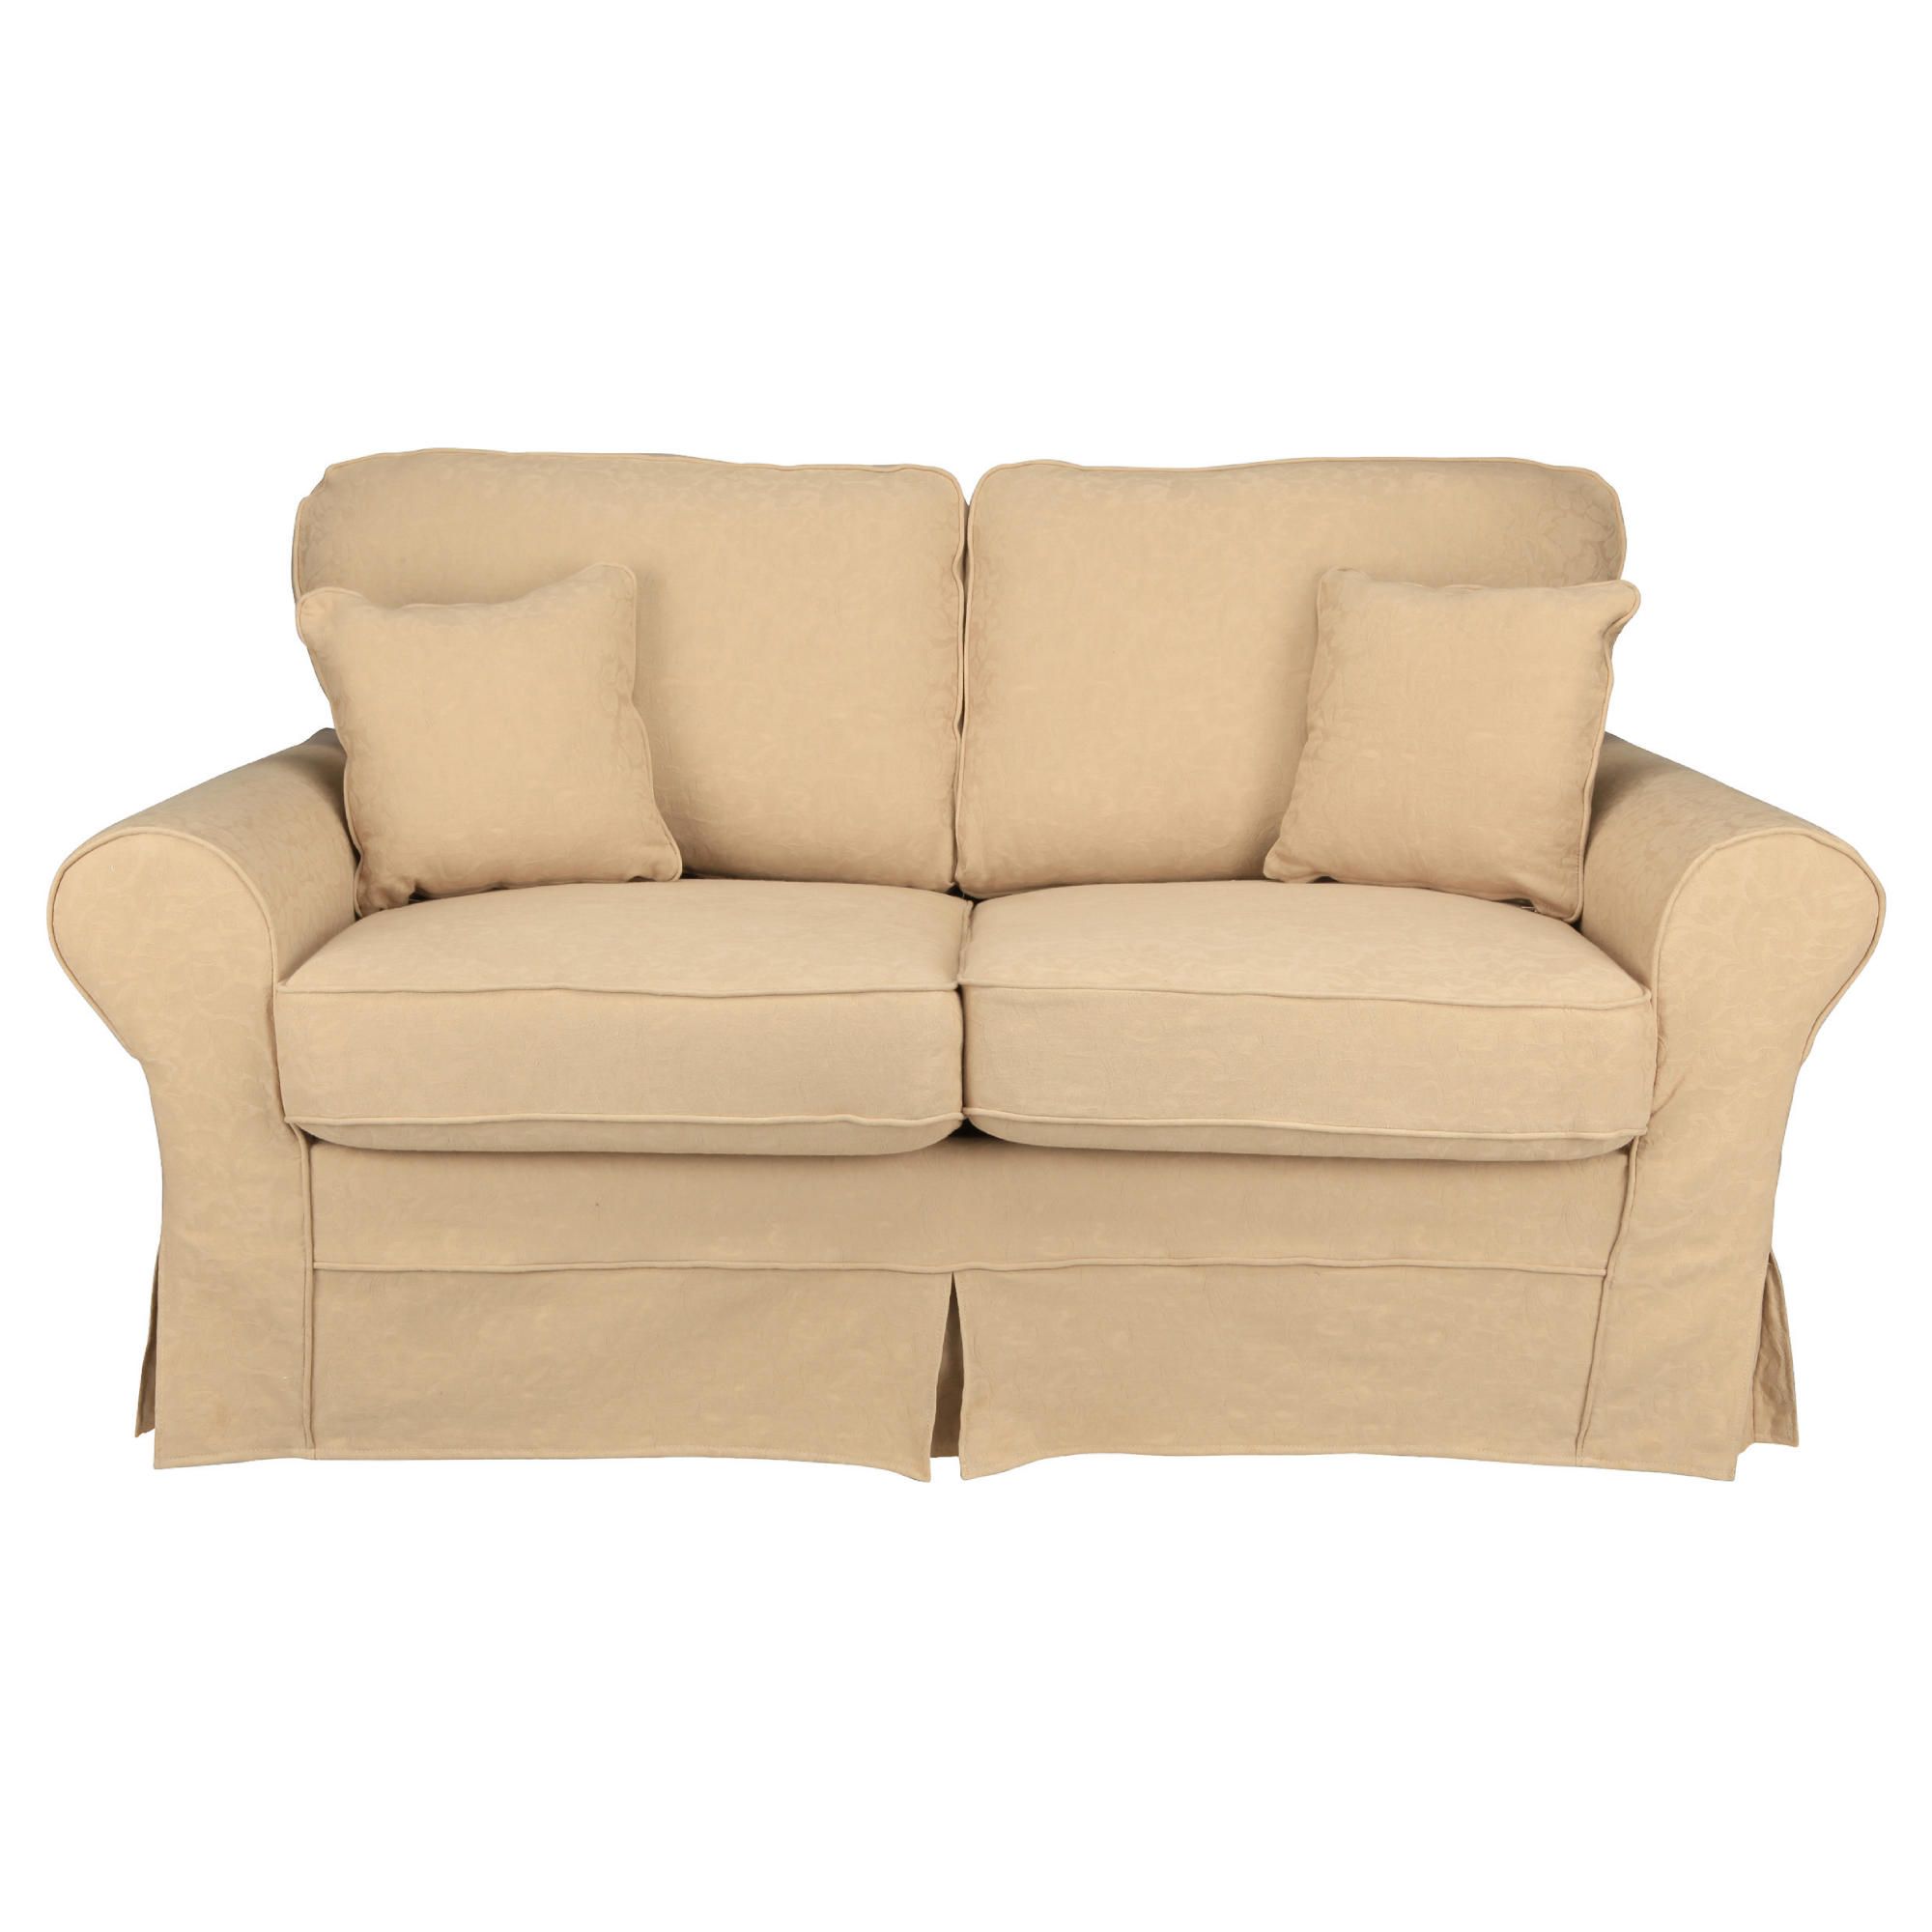 Louisa Sofa Bed with Removable Jaquard Cover, Camel at Tescos Direct